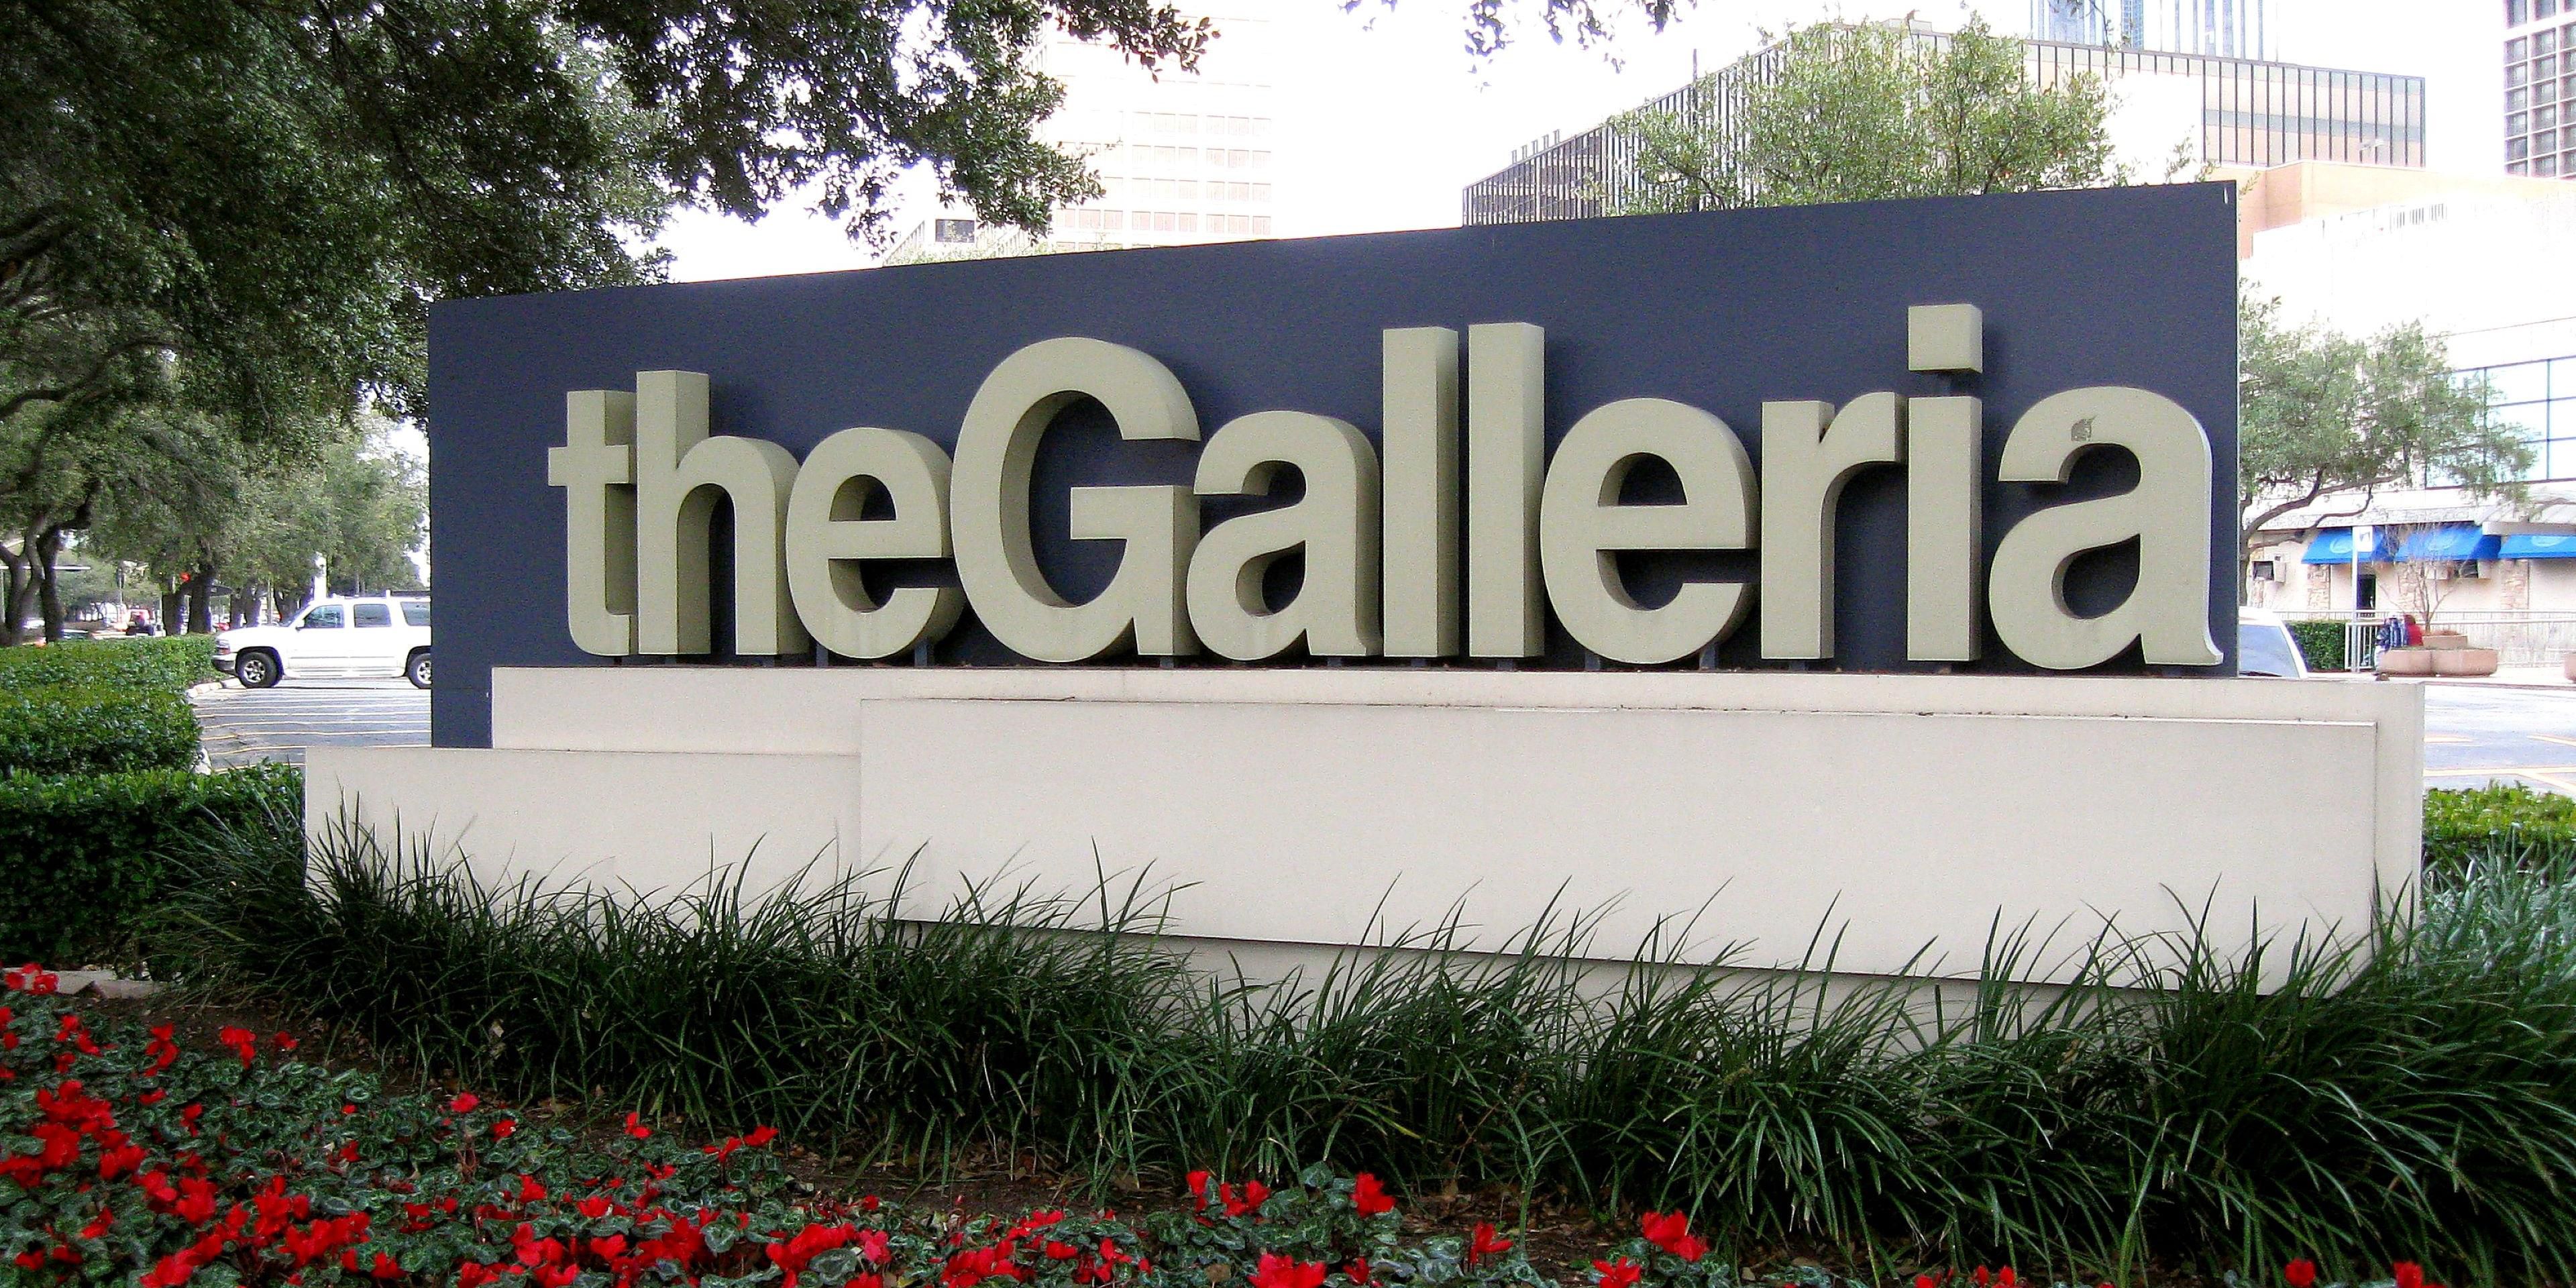 Enjoy some of the best shopping and dining that Houston has to offer. The Galleria is Texas’ largest shopping destination only a couple of minutes from the hotel.